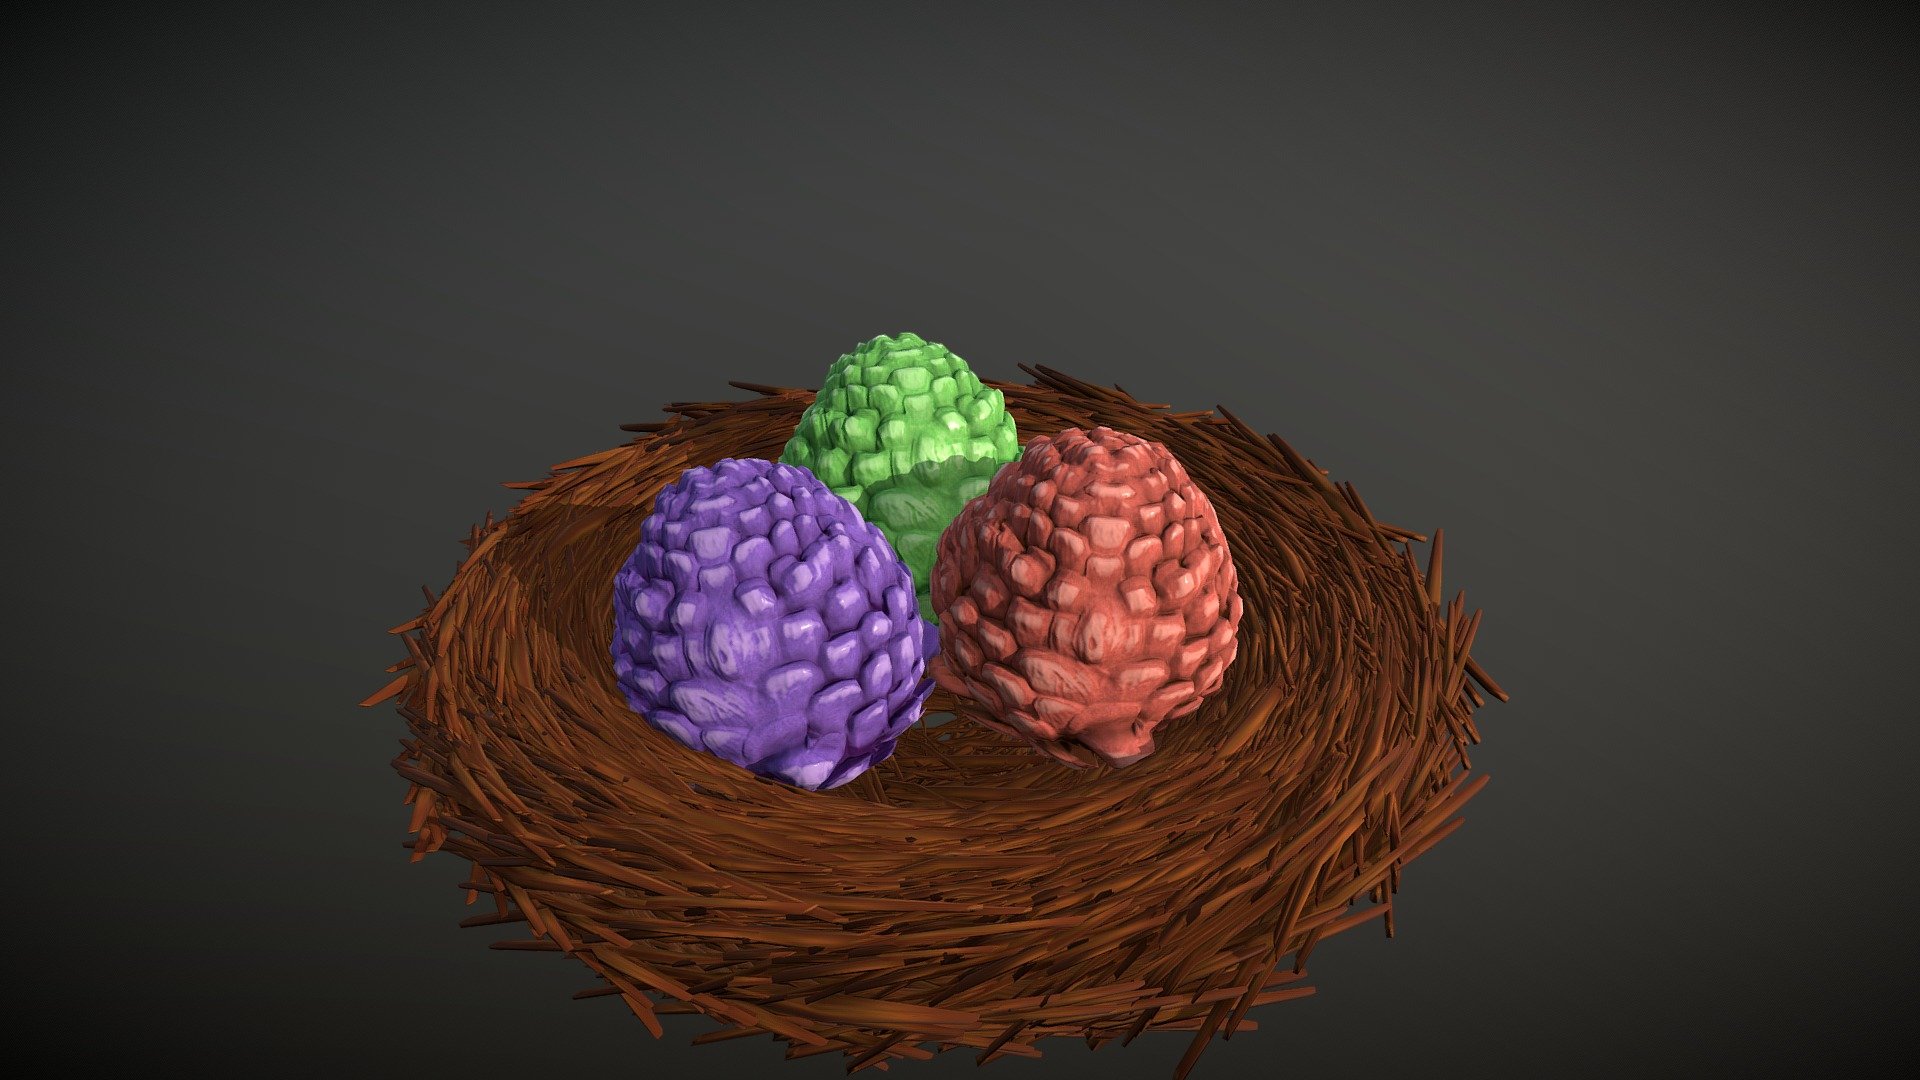 The Egg - new topic for #SketchfabWeeklyChallenge 3d model